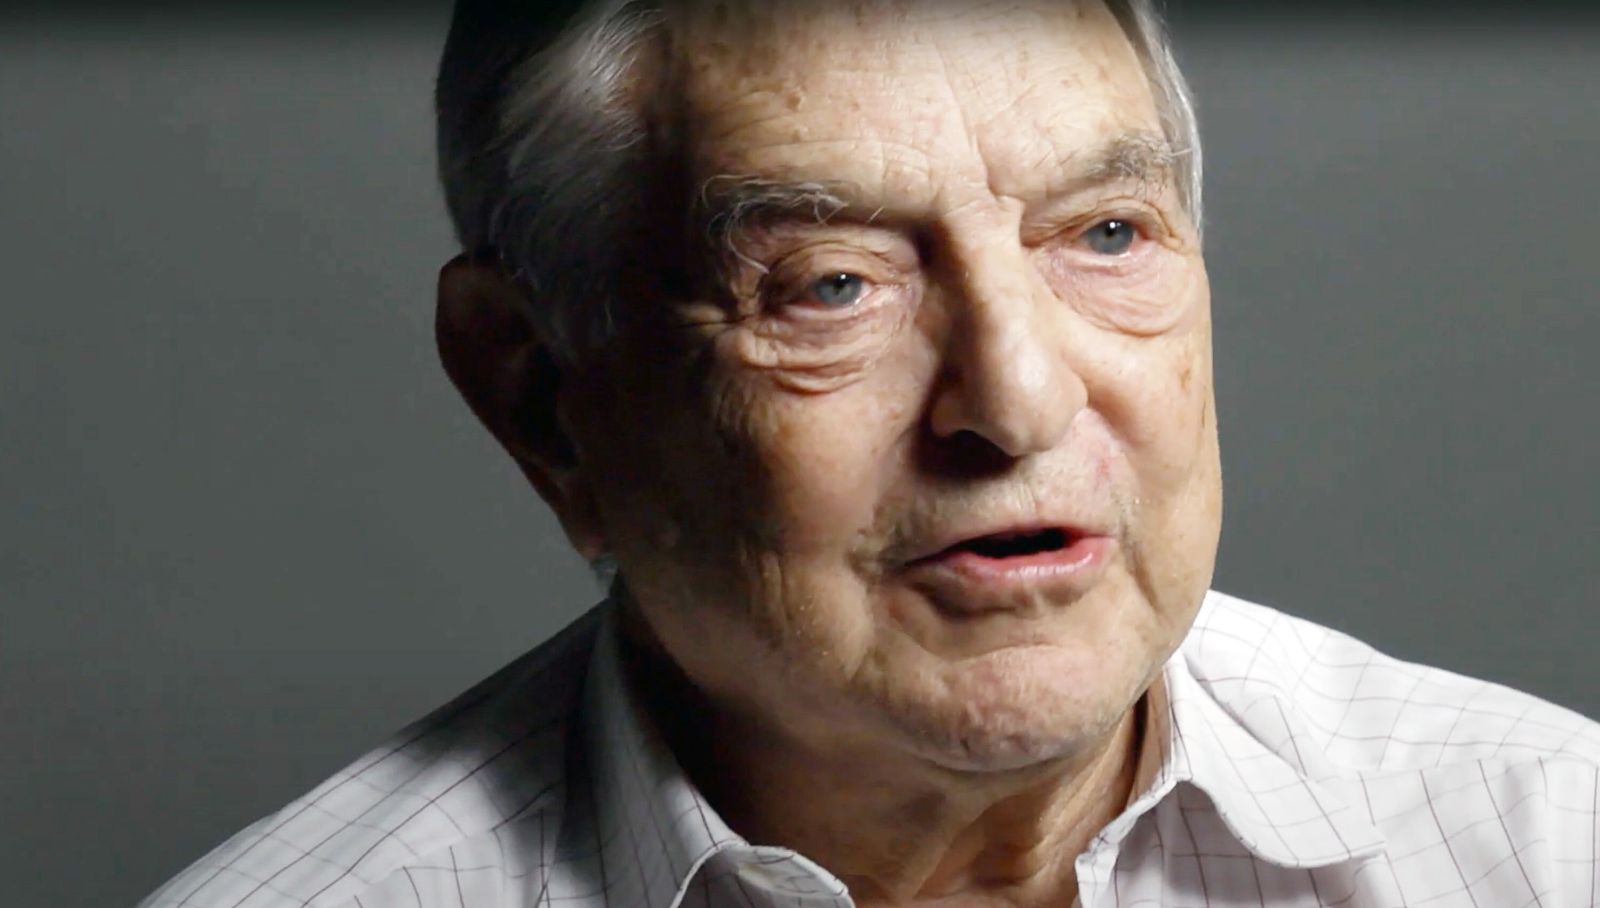 Holocaust survivor George Soros is ostracised by anti-Semites for being a Jew and by the Netanyahu government for criticising its policies.